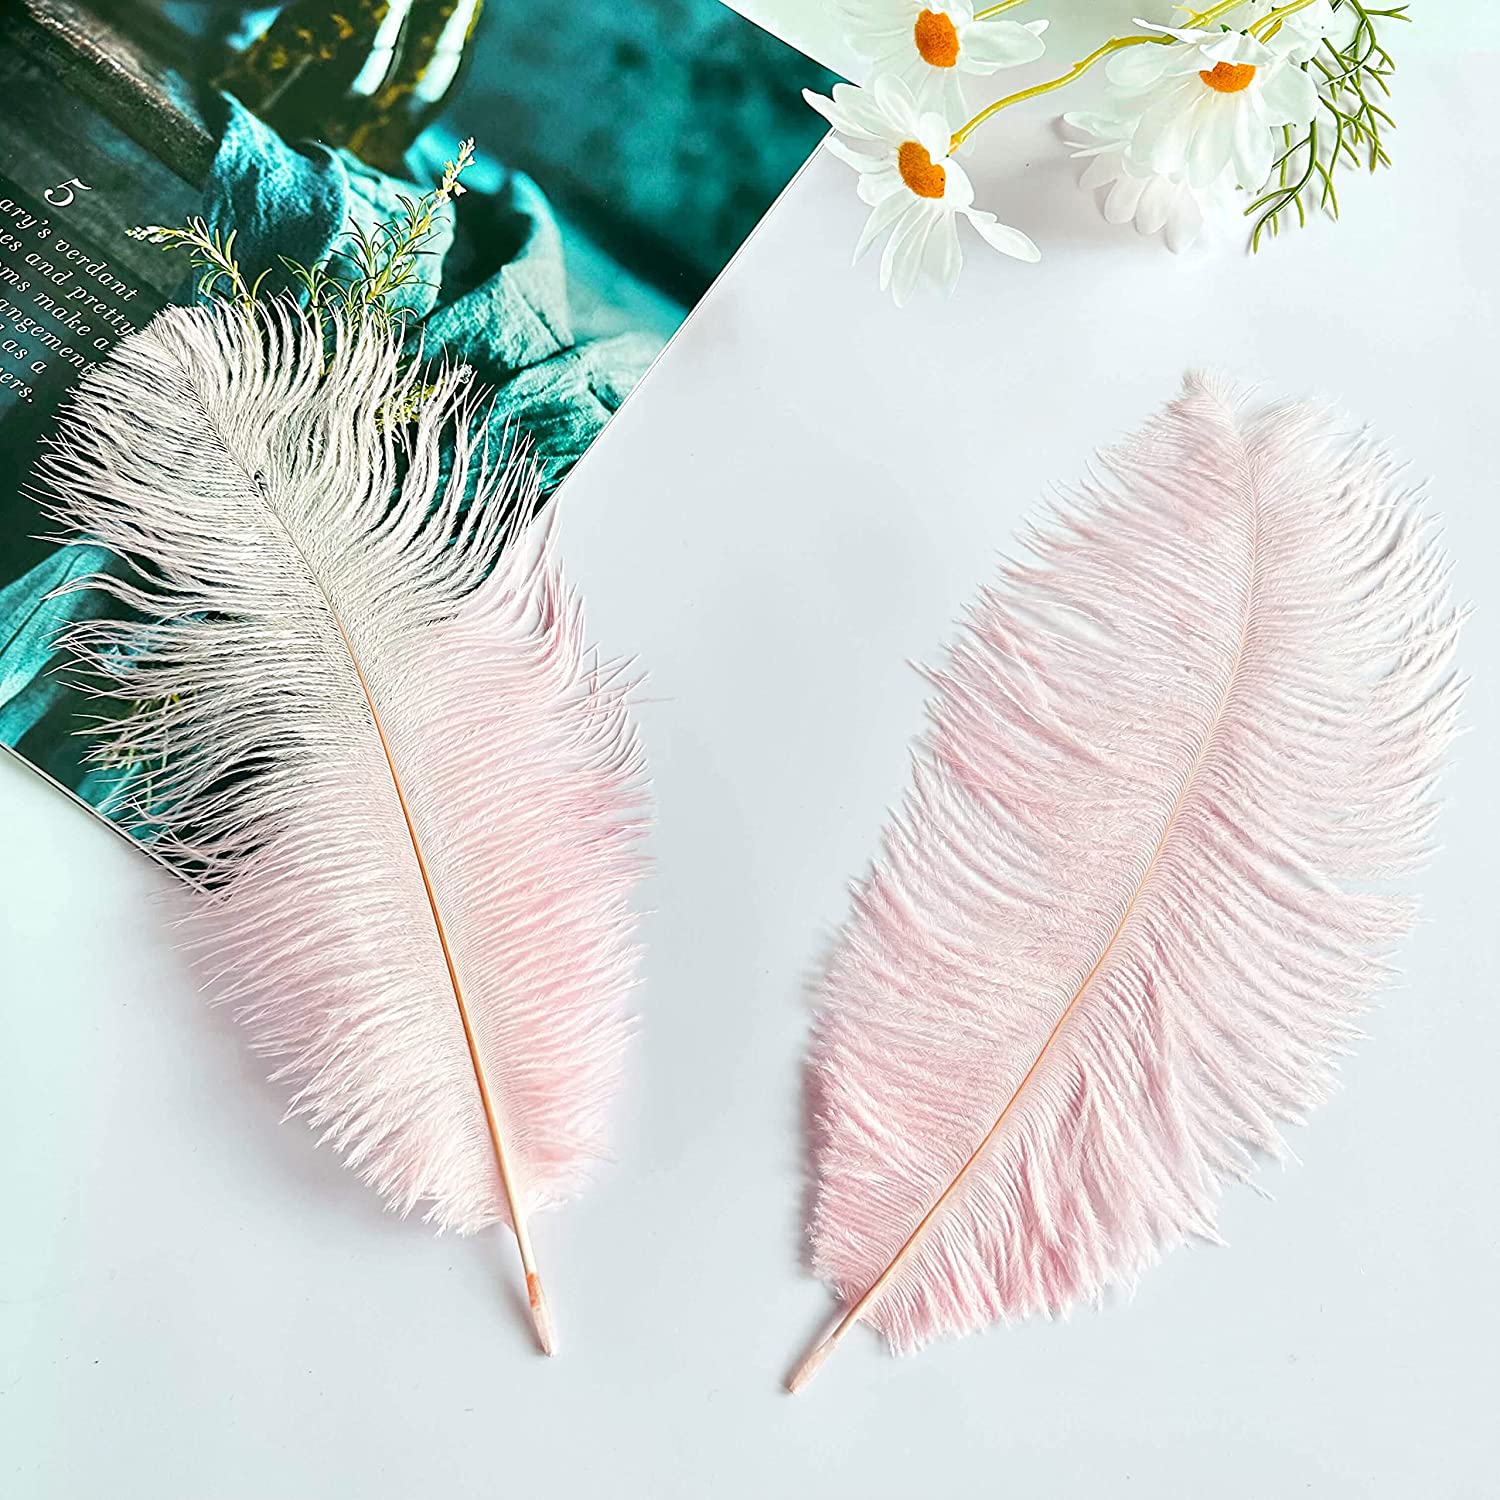 100 Pcs Natural Ostrich Feathers 8-10 Inch/ 20-25 cm Plumes Feathers for  Crafts White Black Ostrich Feathers Bulk for DIY Home Decoration Christmas